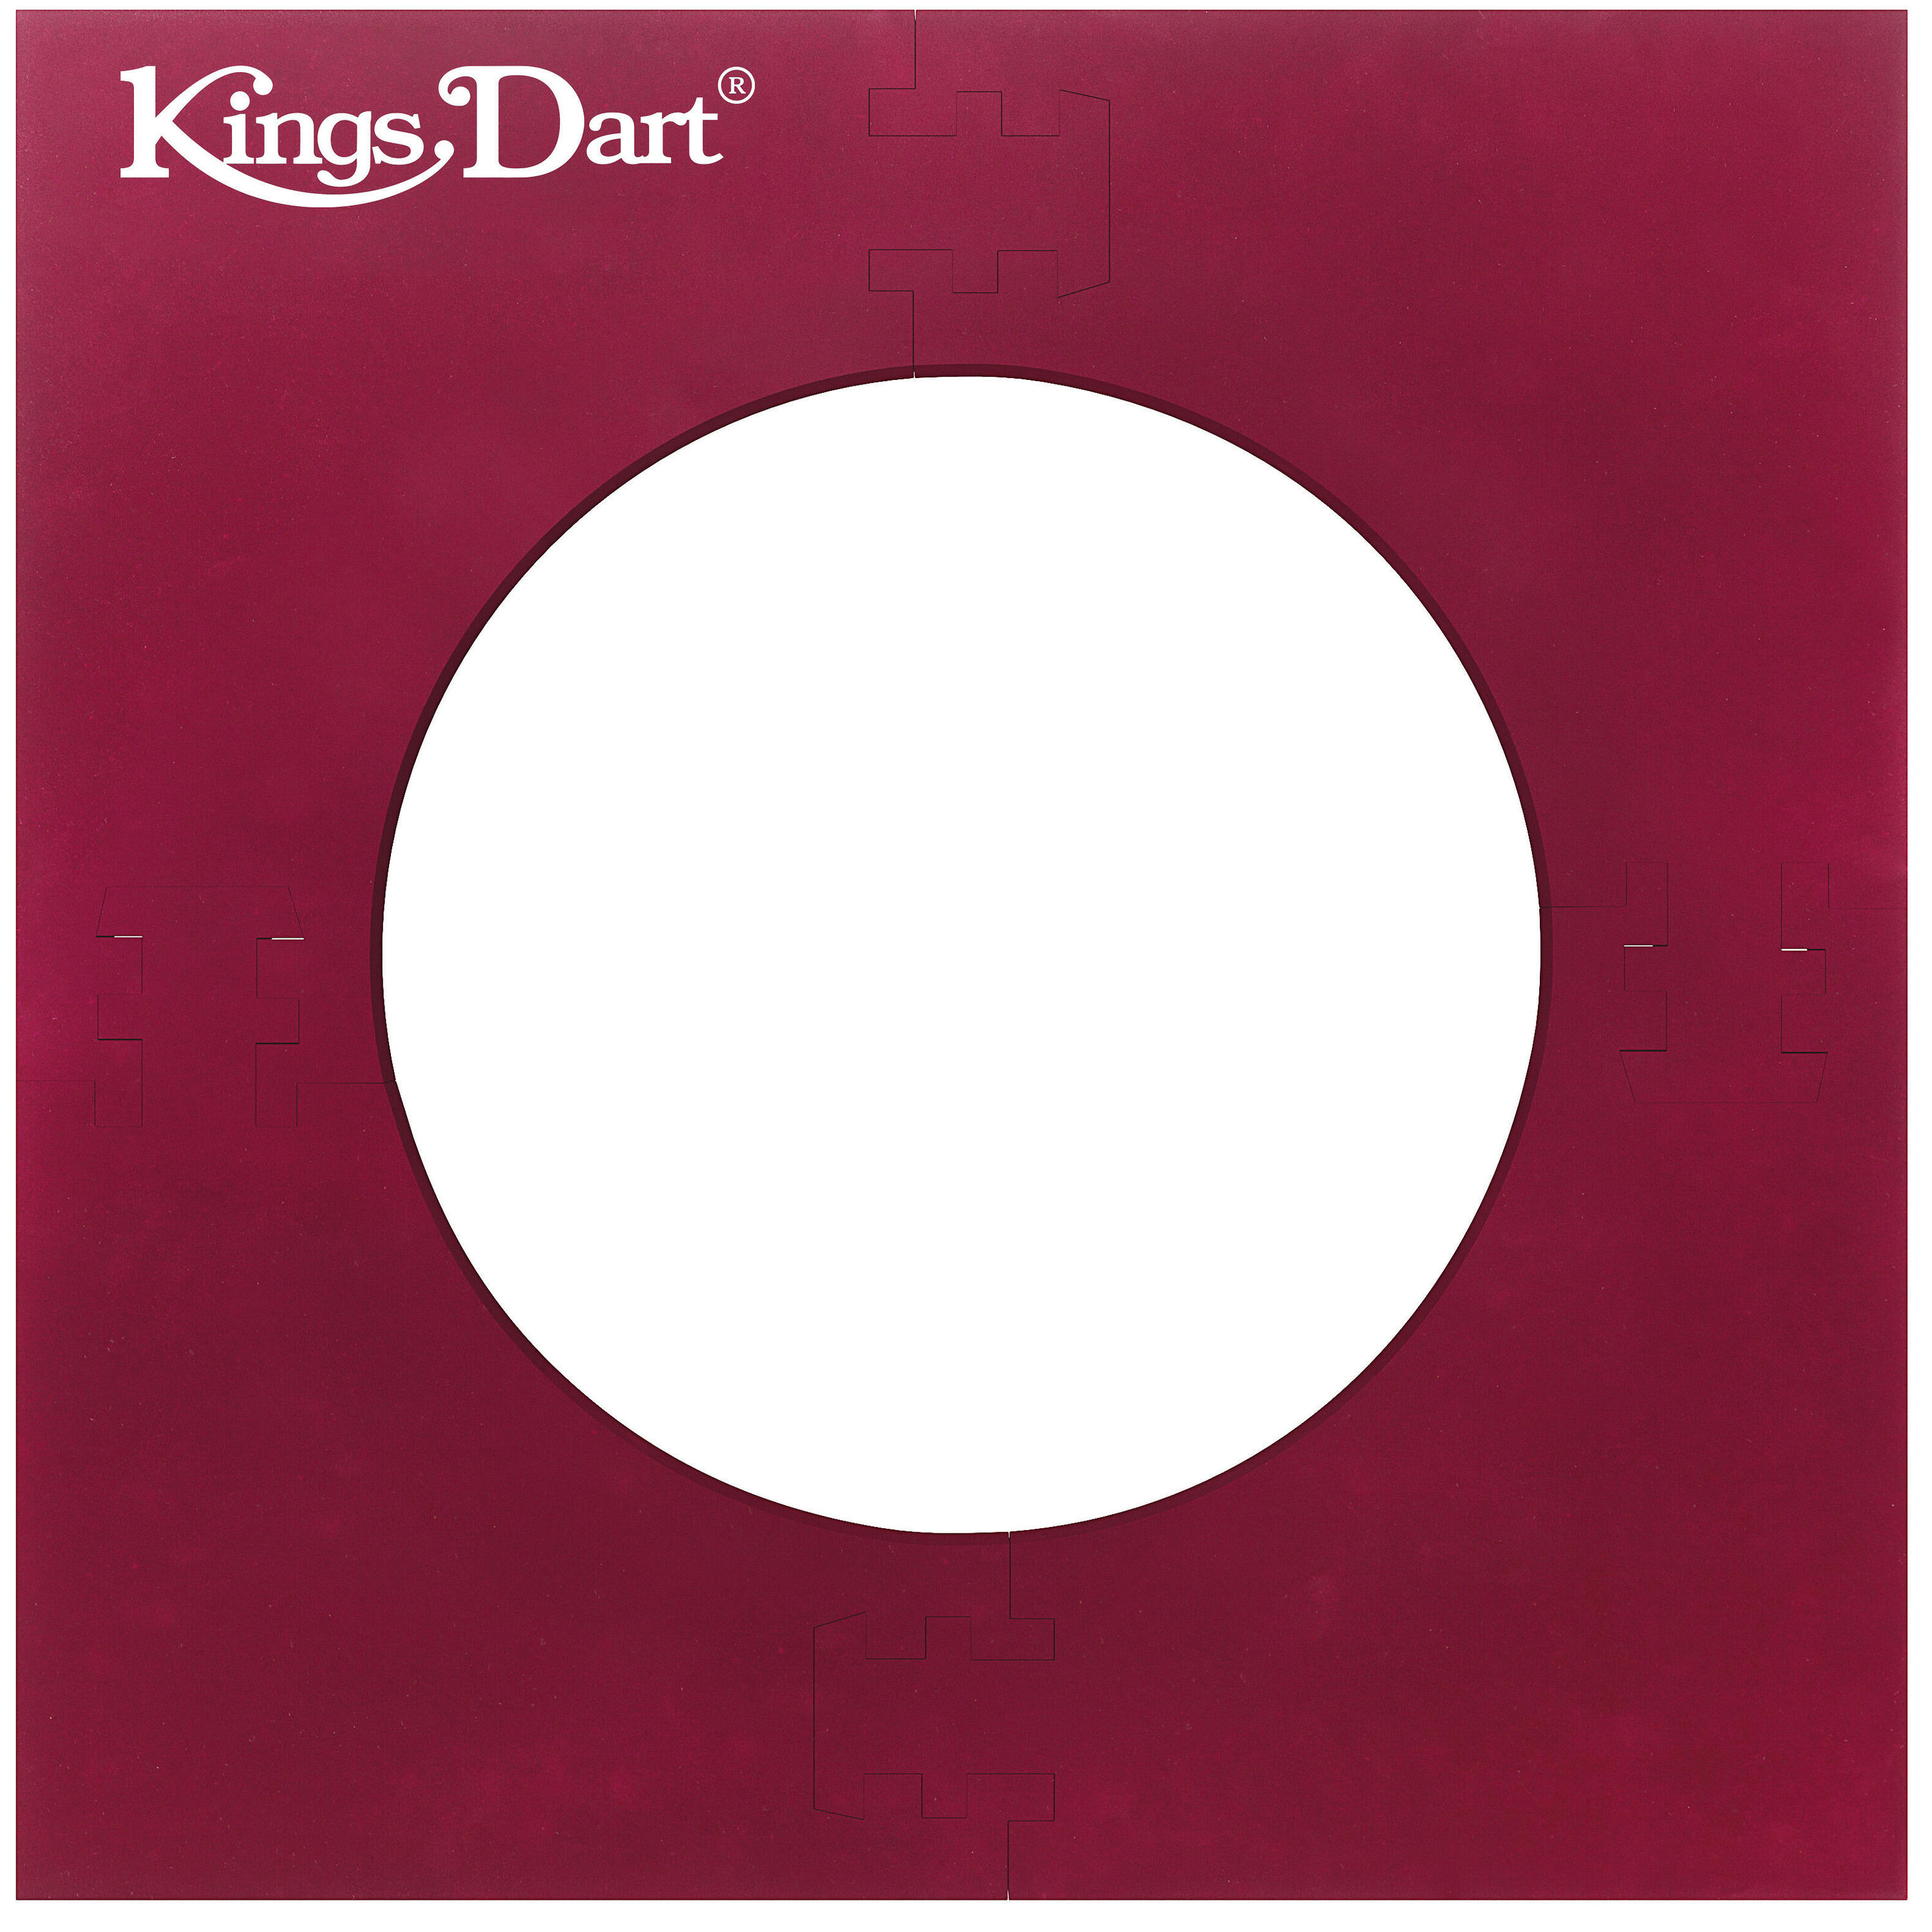 Kings Dart Dartboard Surround Standard dart board 17inch plastic dartboard dart board game set with 6 magnetic darts for competition family entertainment dartboard